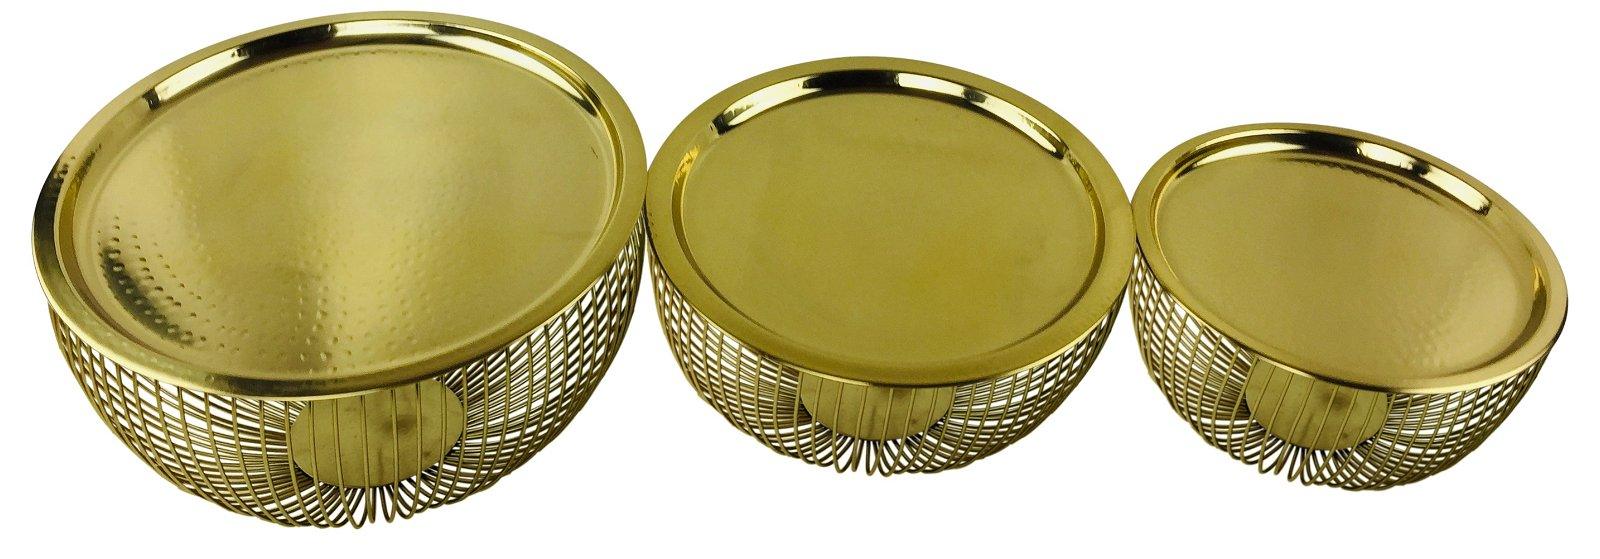 View Set Of 3 Gold Bowls With Plate Tops information